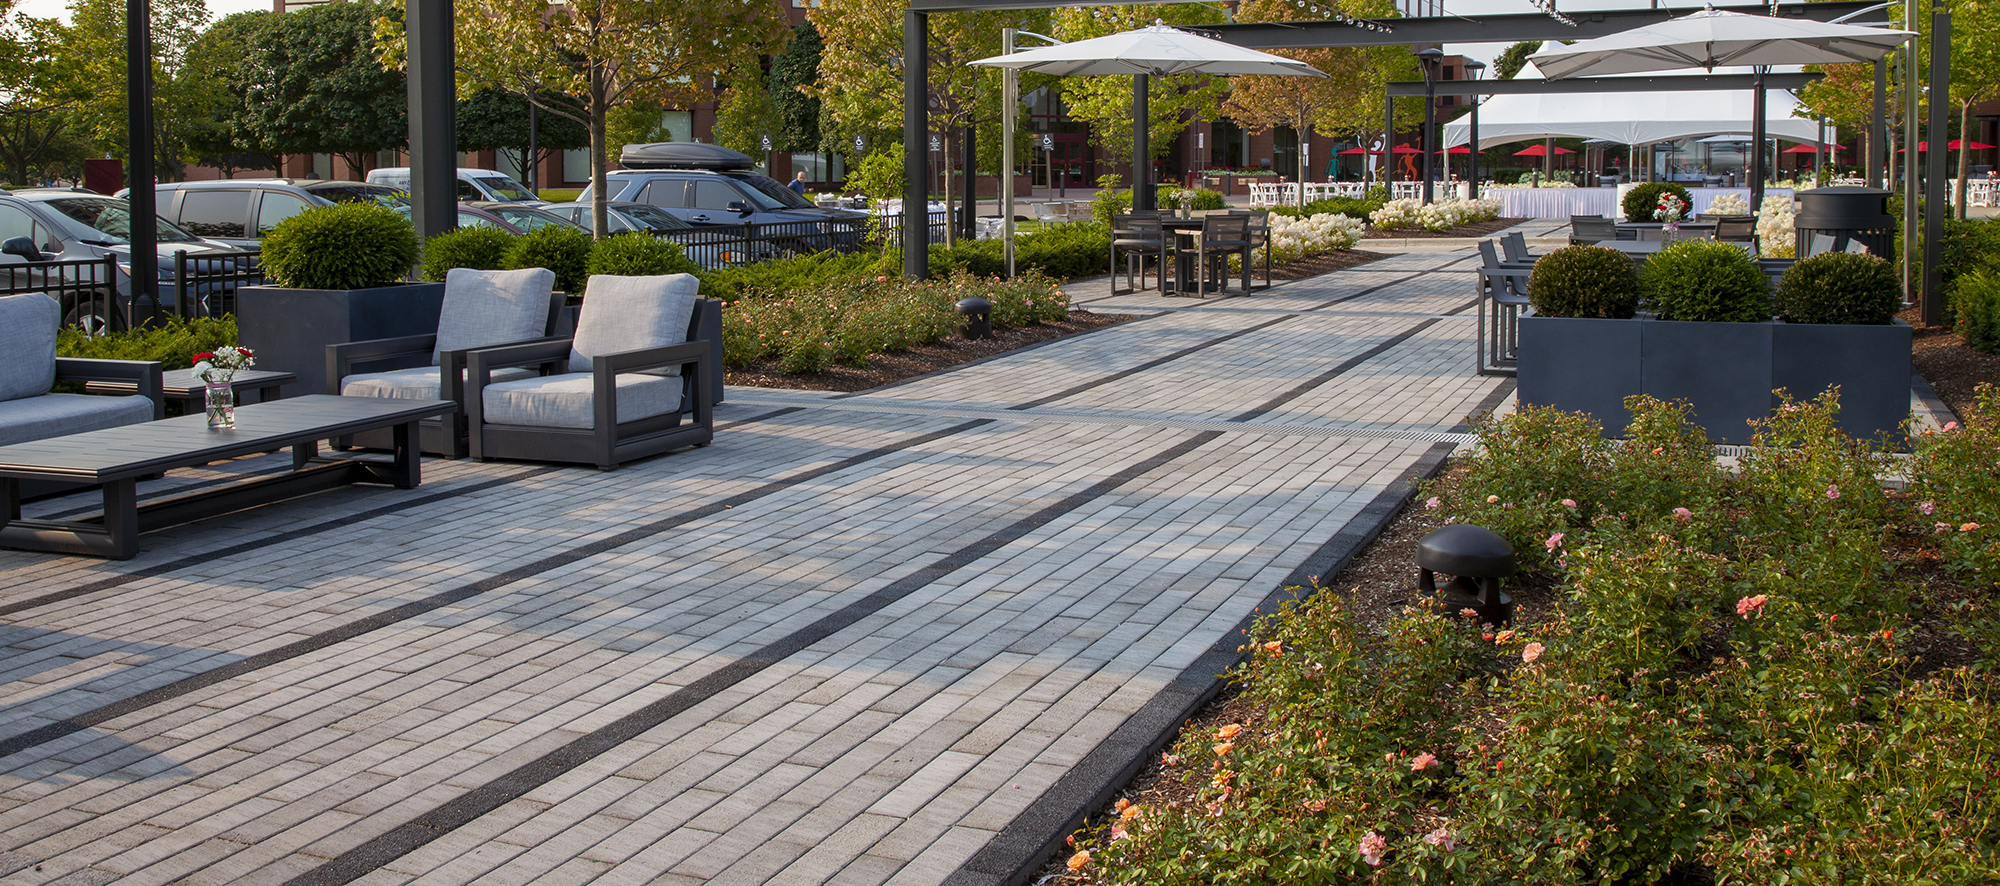 Two-toned Promenade Plank pavers delineate rows of walking spaces, with outdoor tables, chairs and umbrellas and landscaping on the sides.